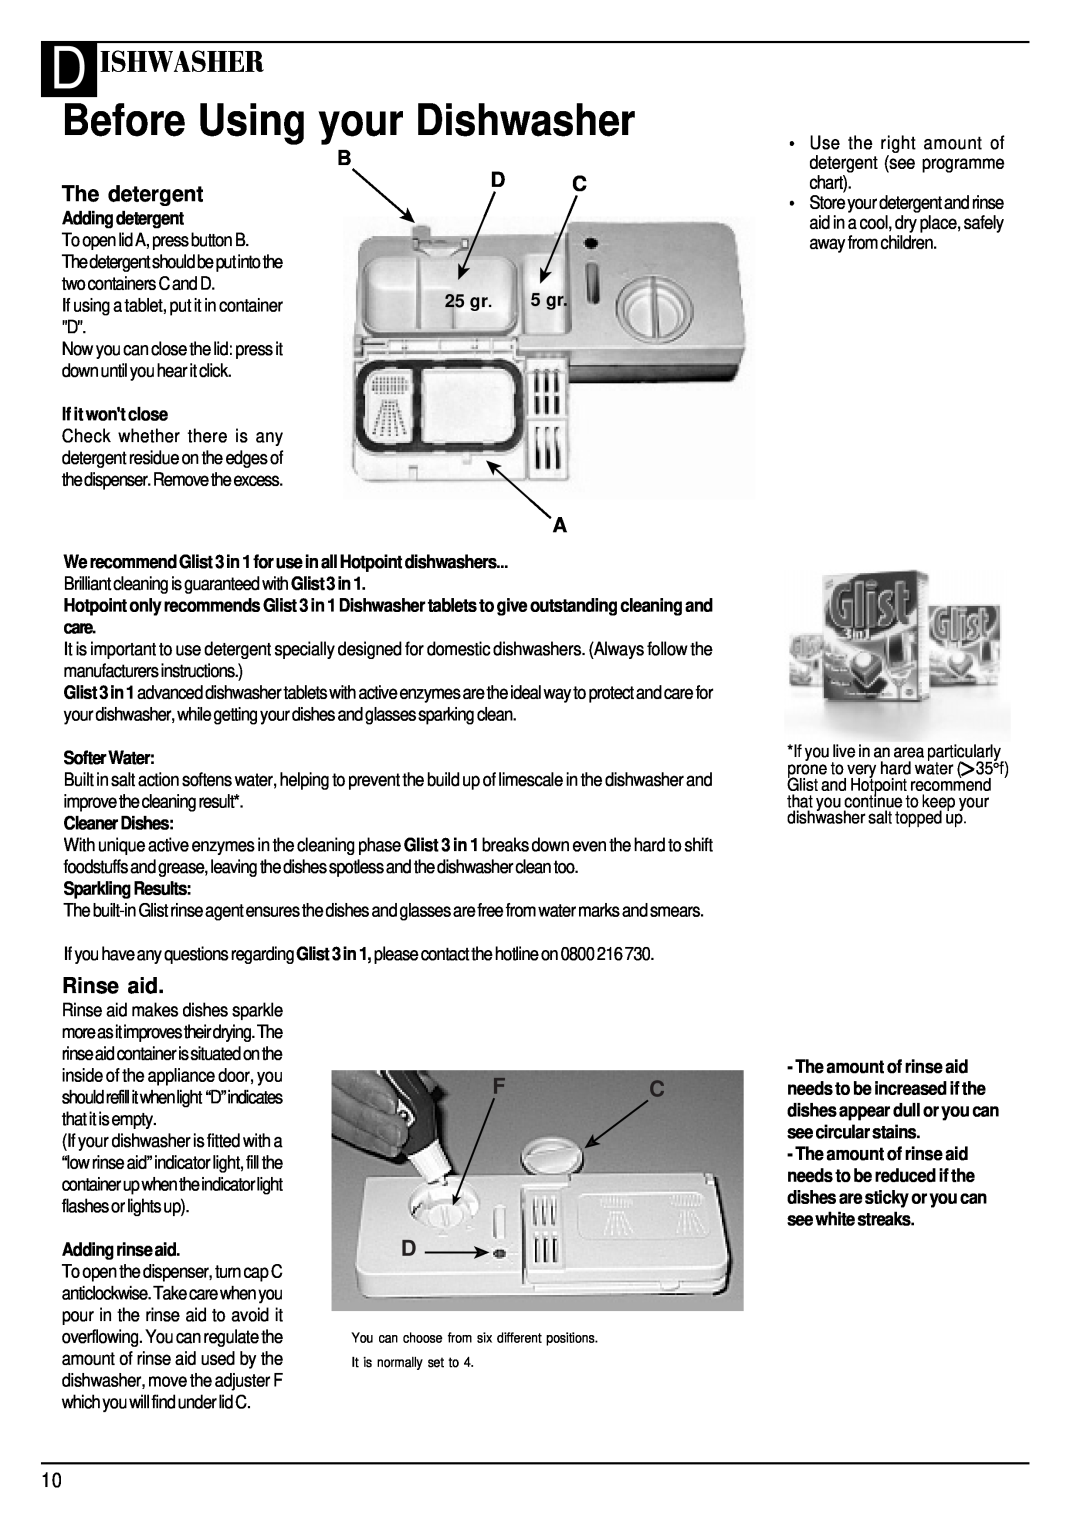 Hotpoint BFI62 manual Before Using your Dishwasher, D Ishwasher, The detergent, Rinse aid, Fc D, Adding detergent, 25 gr 